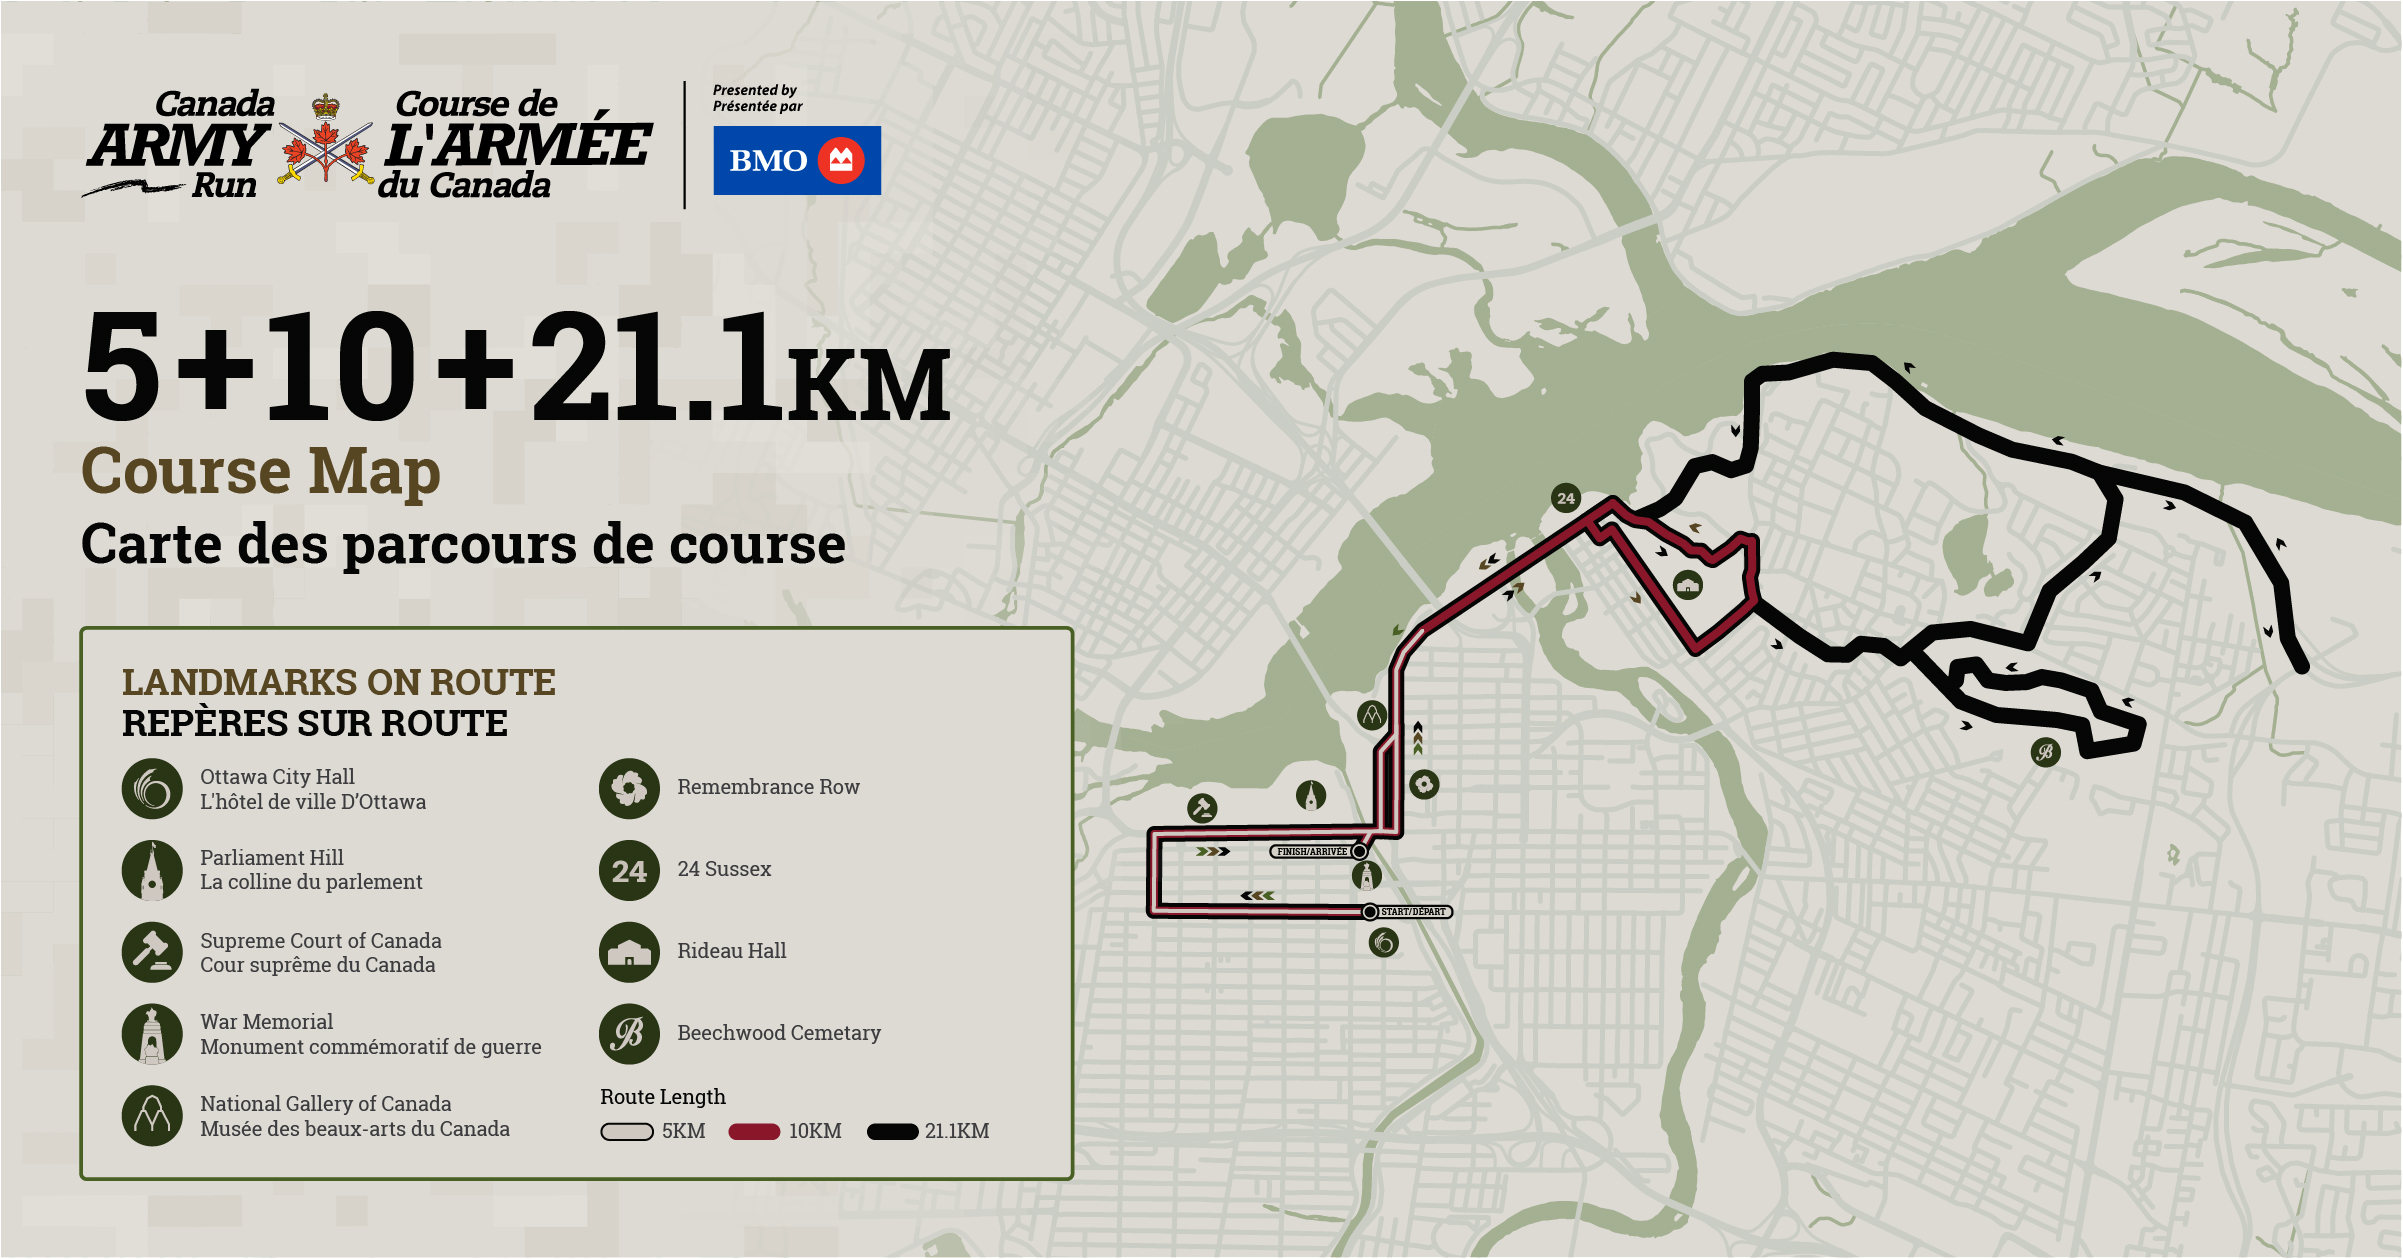 2023 Canada Army Run Course Map/ Parcours 2023